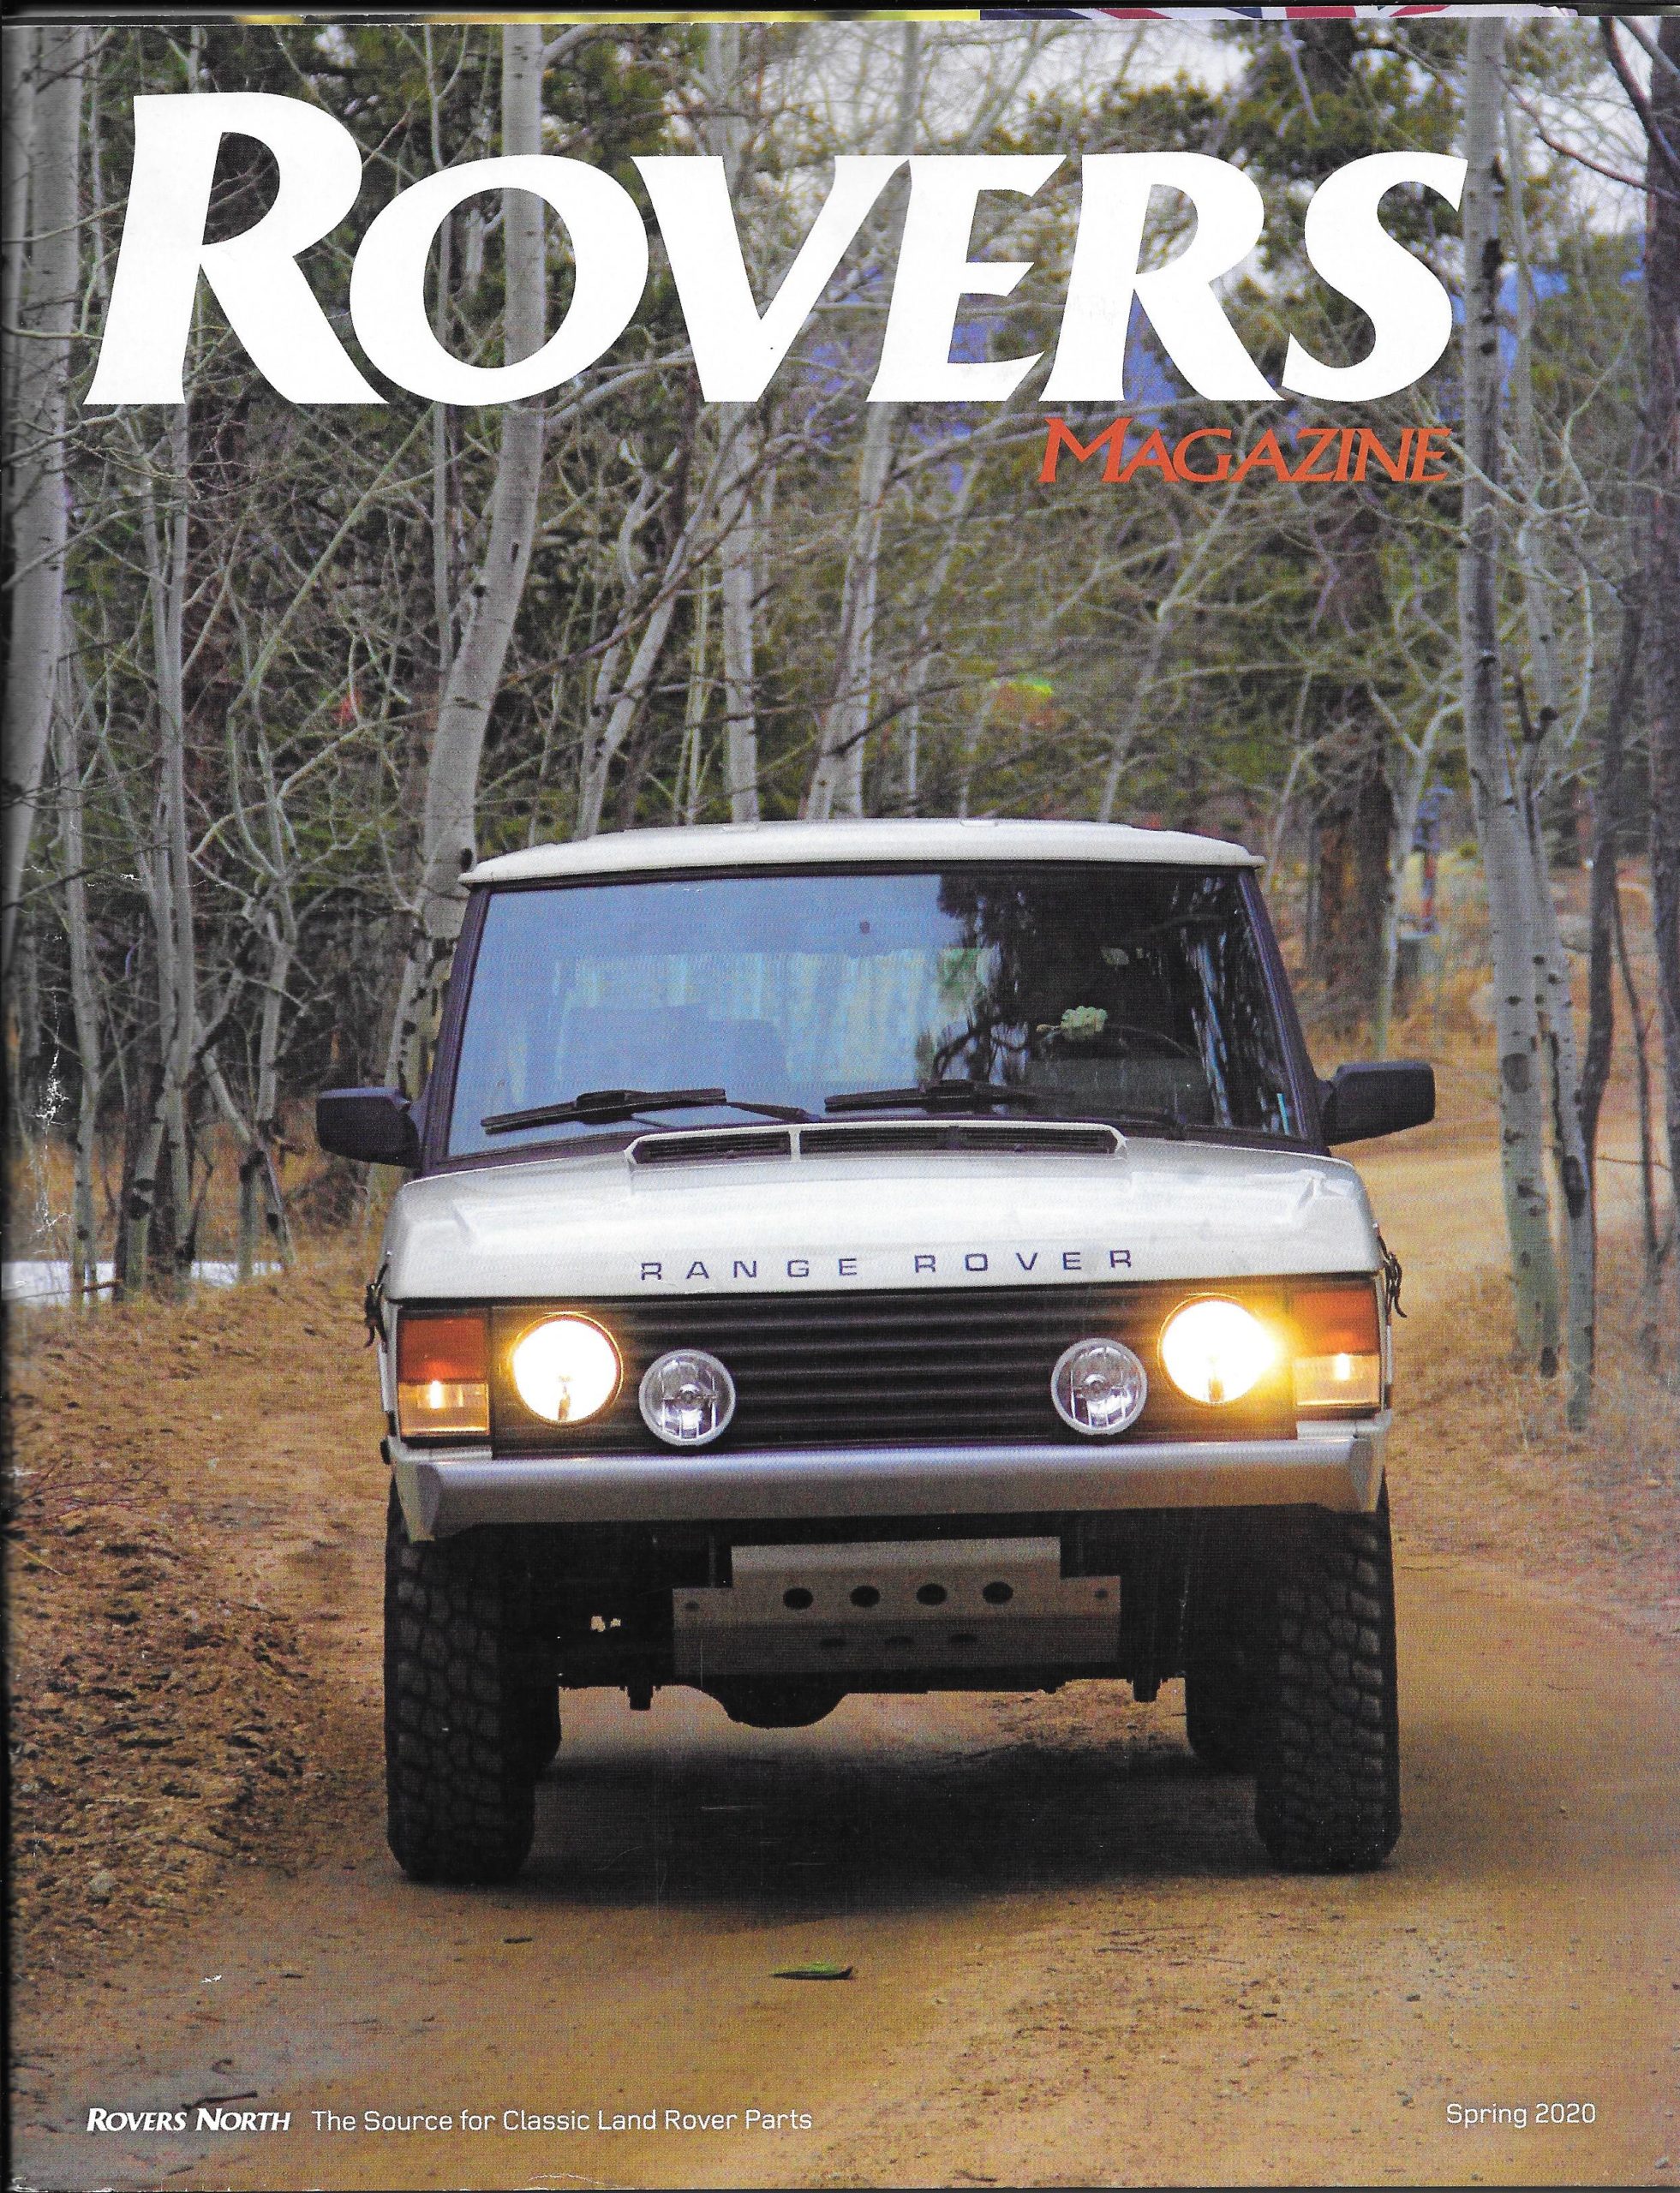 Rovers Magazine Cover Spring 2020